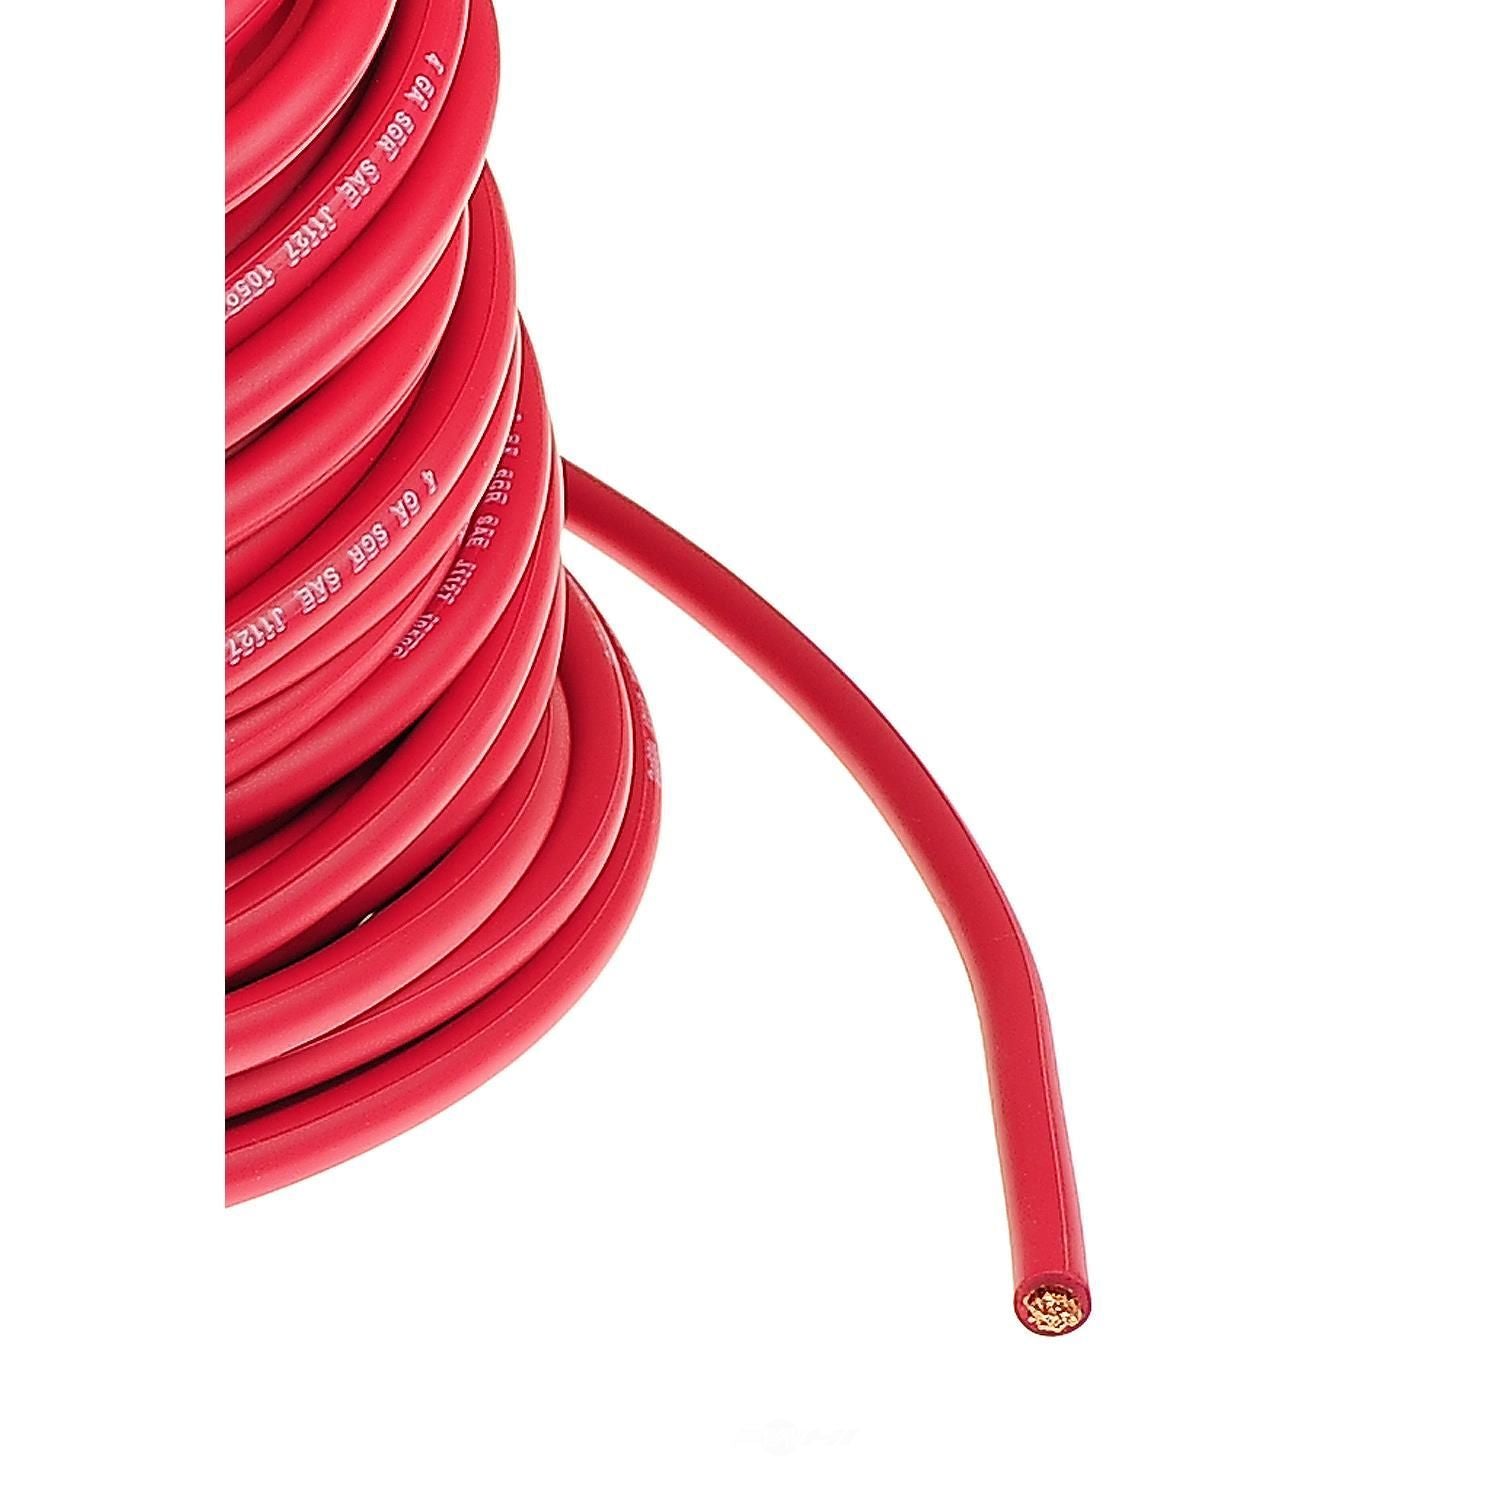 YSP CB13RD-100 Wells Bulk Cable (Red, 100', 4G)